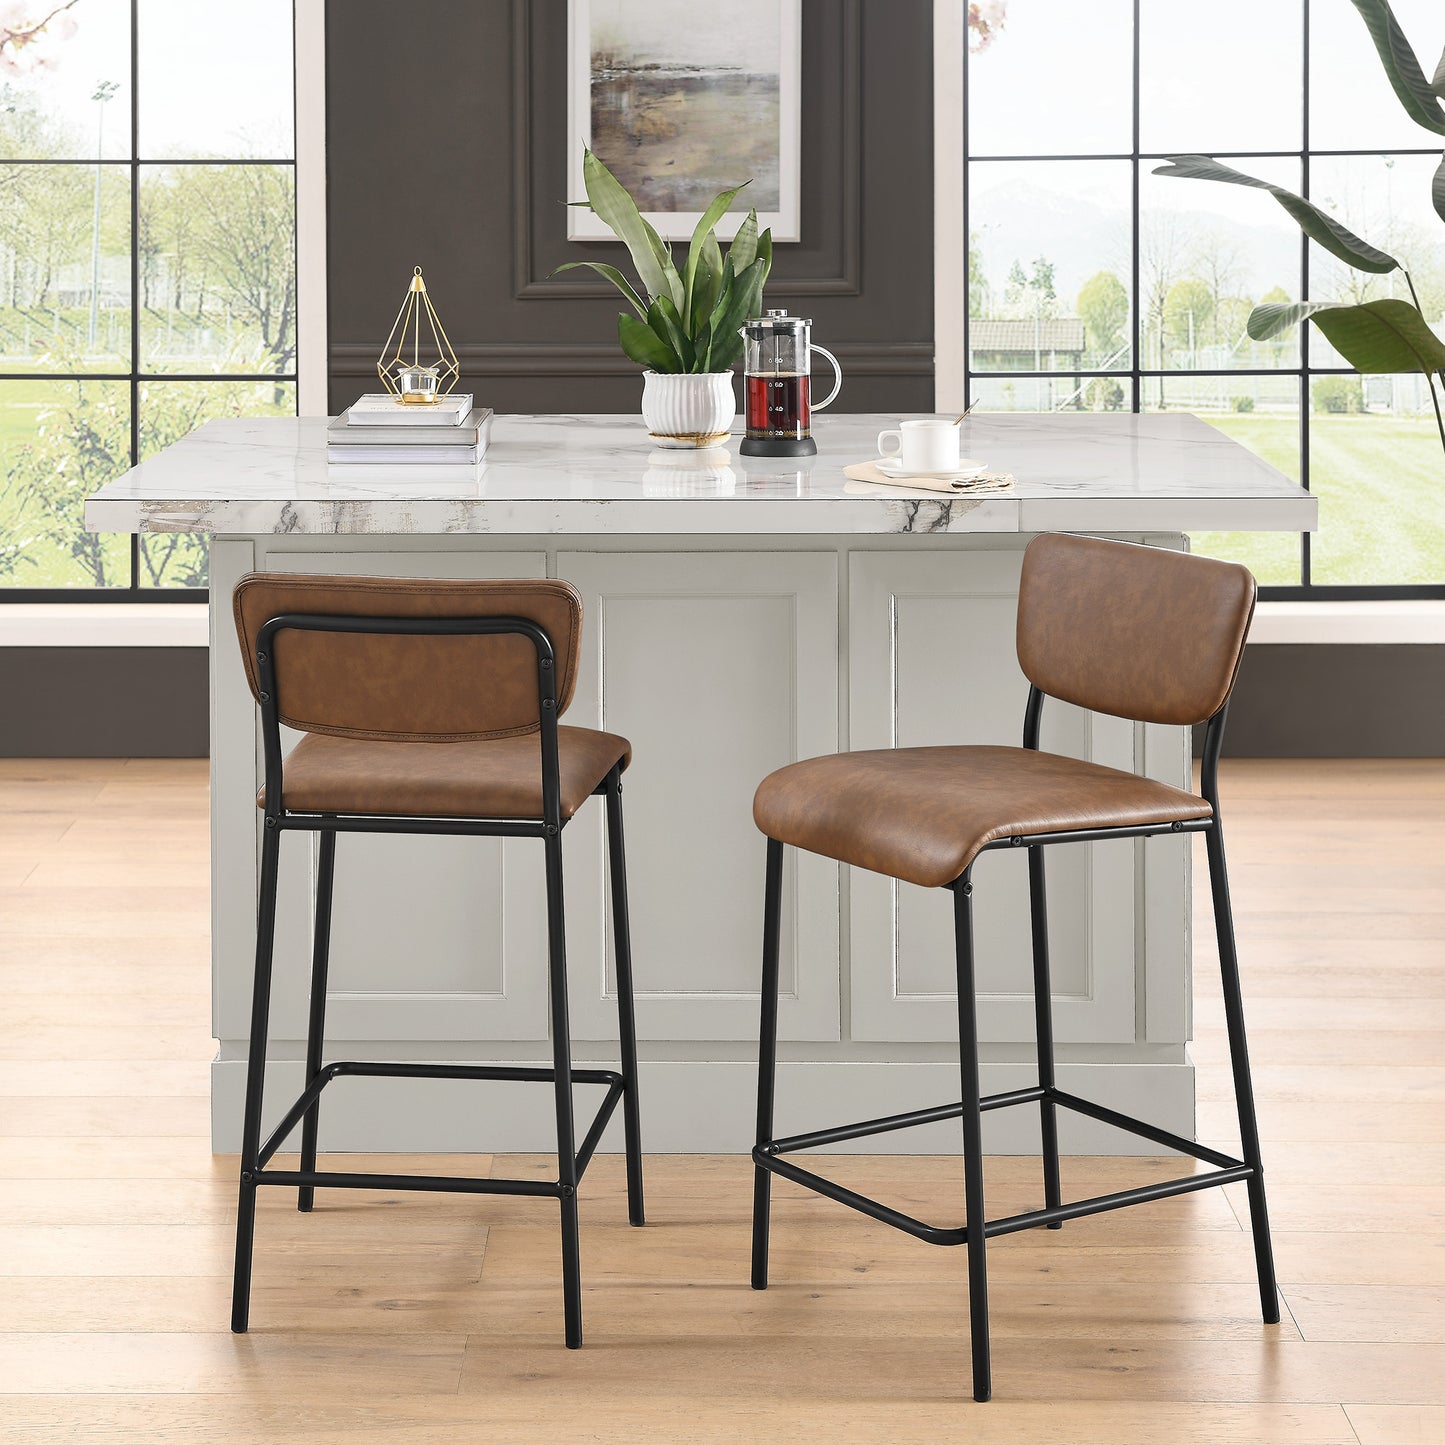 Pu Faux Leather Counter Stools Set of 2, Pub Counter Stool with Back and Footrest, Brown (17.5"x19.25“x34.5”）